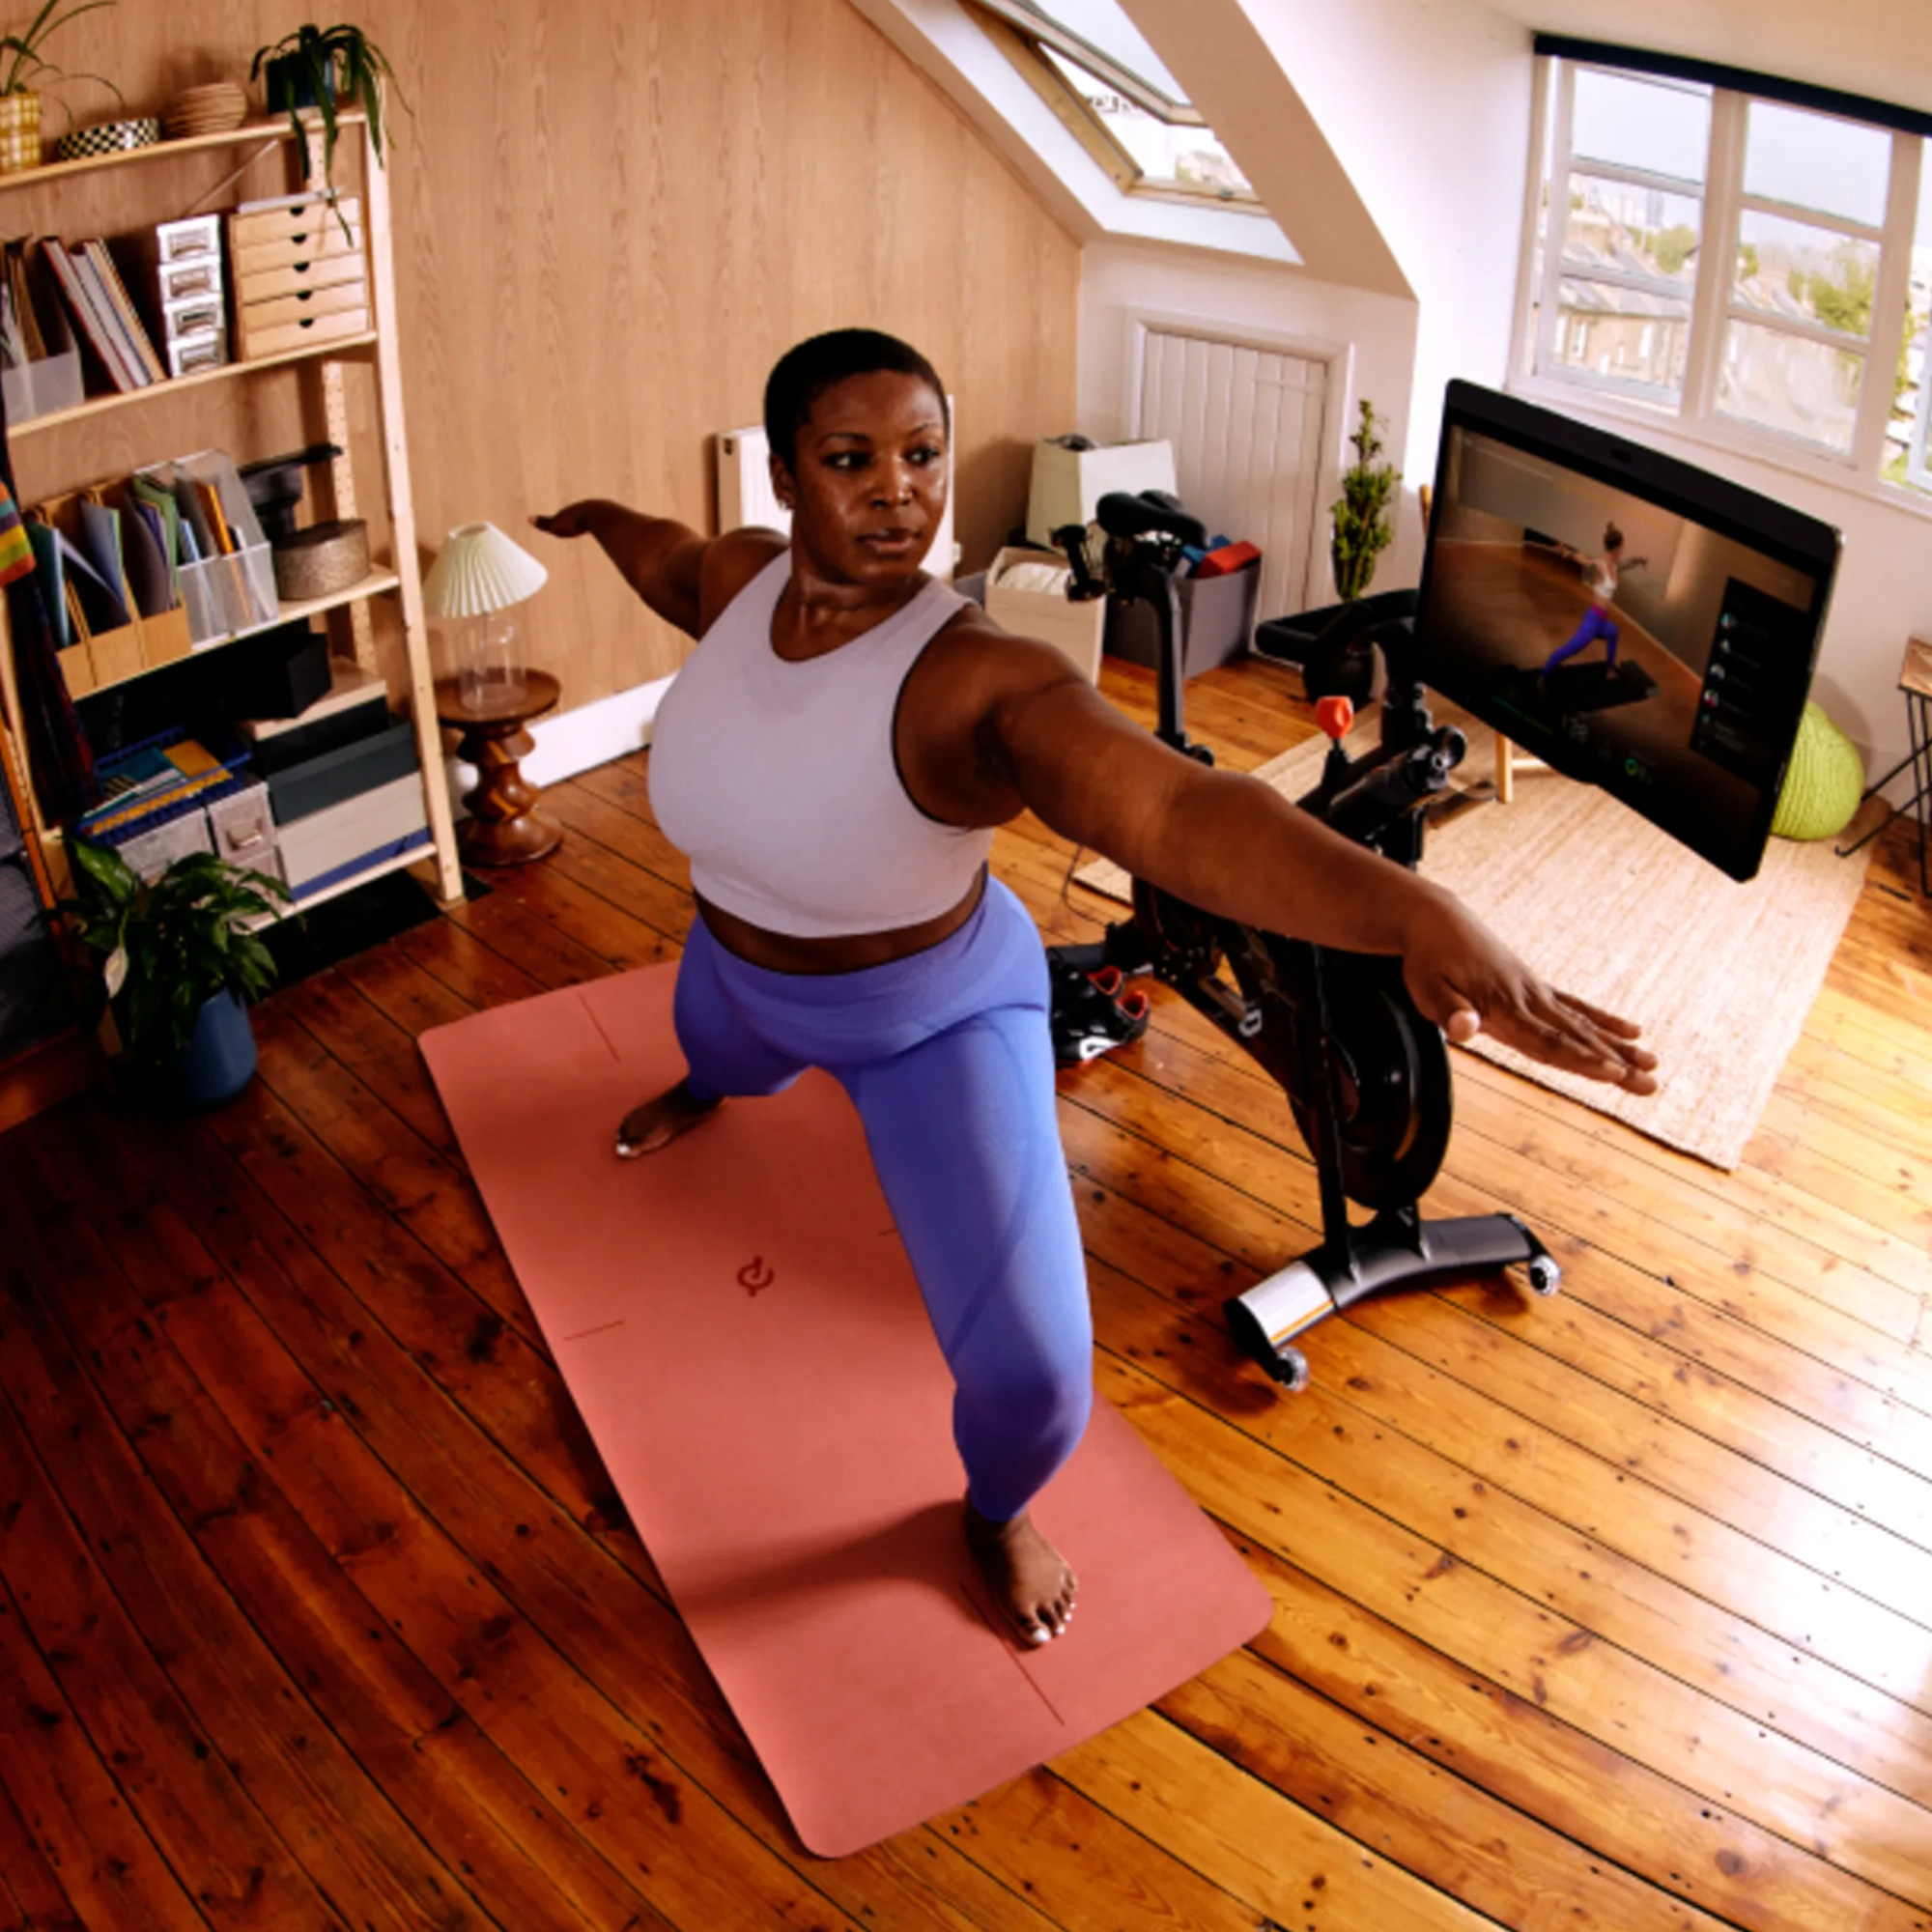 A woman standing on a mat doing exercises in a loft room beside a Peloton exercise bike